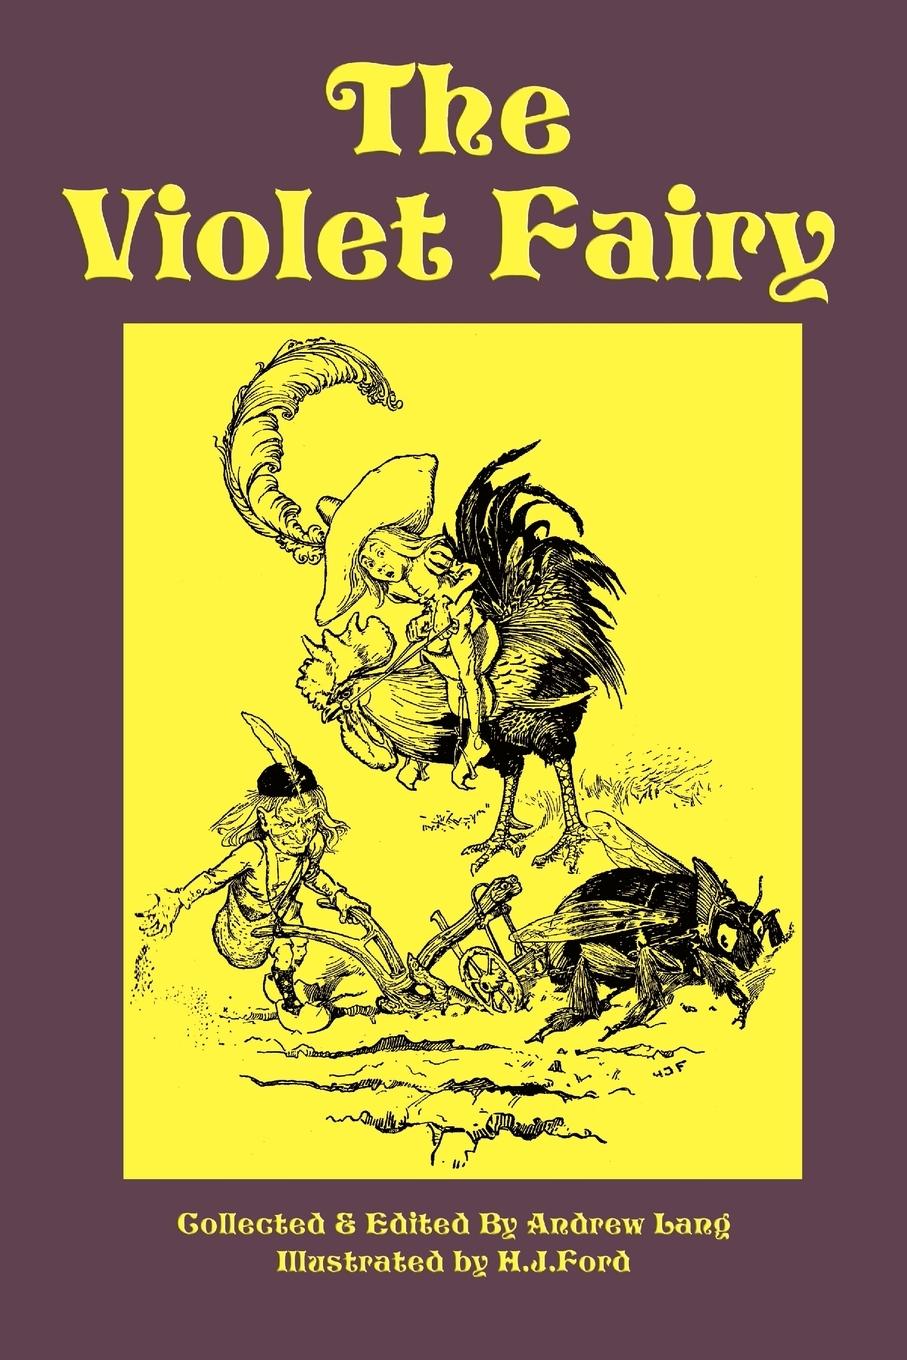 The Violet Fairy Book - Lang, Andrew